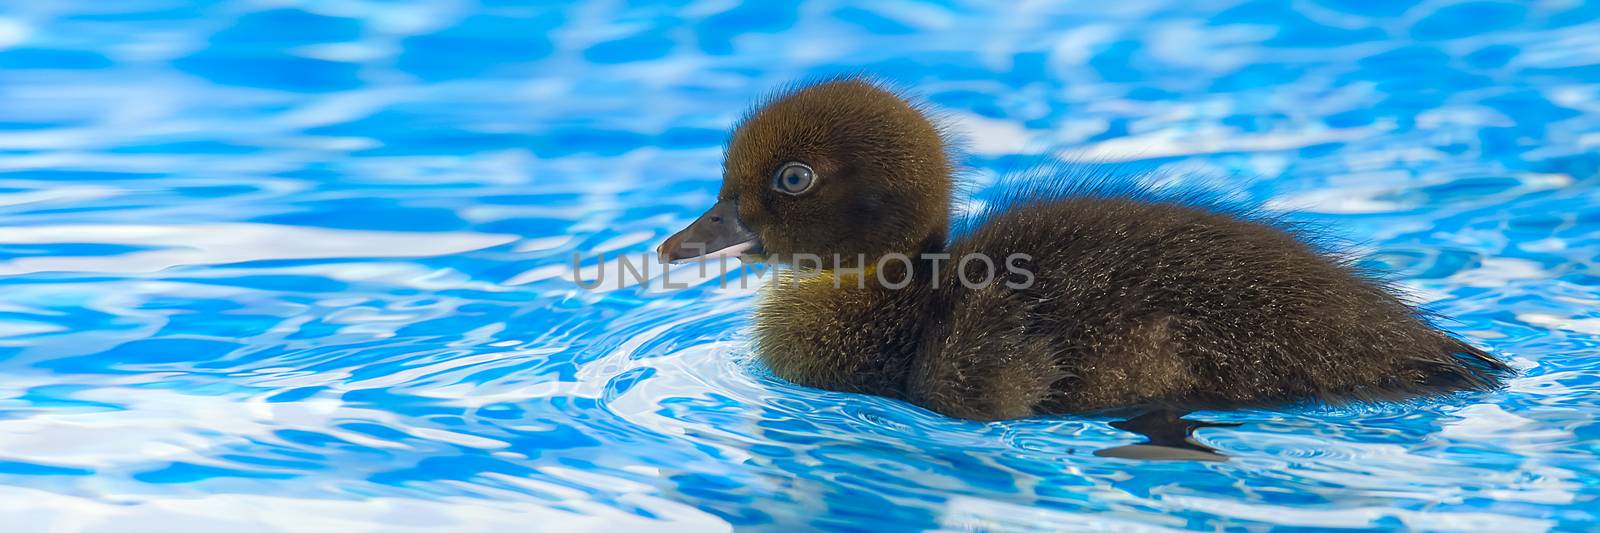 Brown small cute duckling in swimming pool. Black Duckling swimming in crystal clear blue water sunny summer day. by PhotoTime